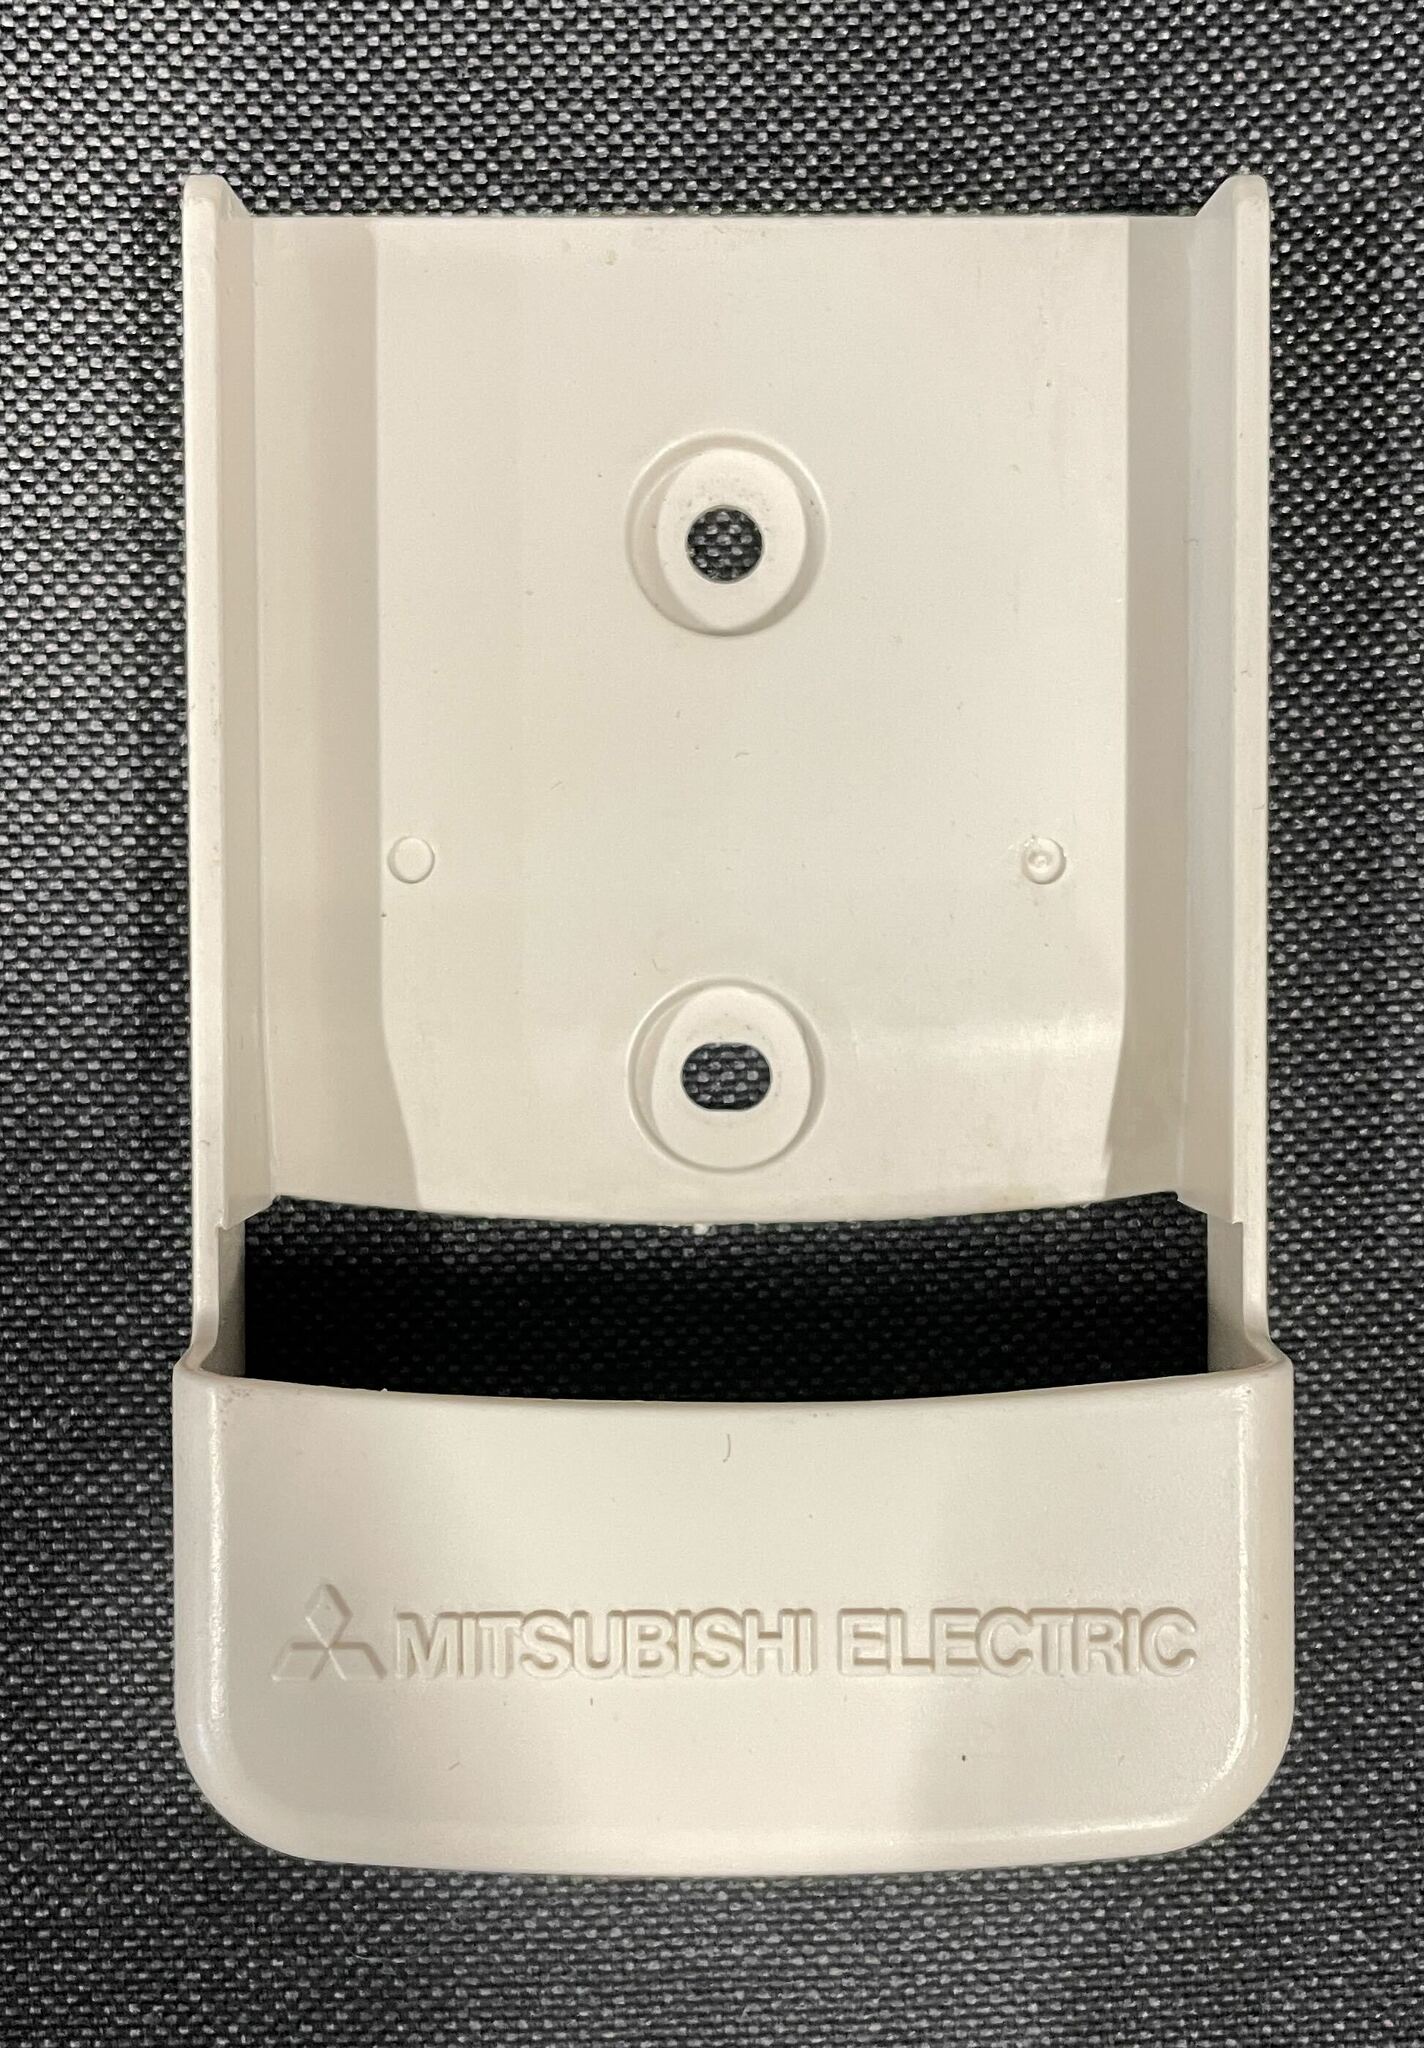 Holder with logo for Mitsubishi Electric remote control